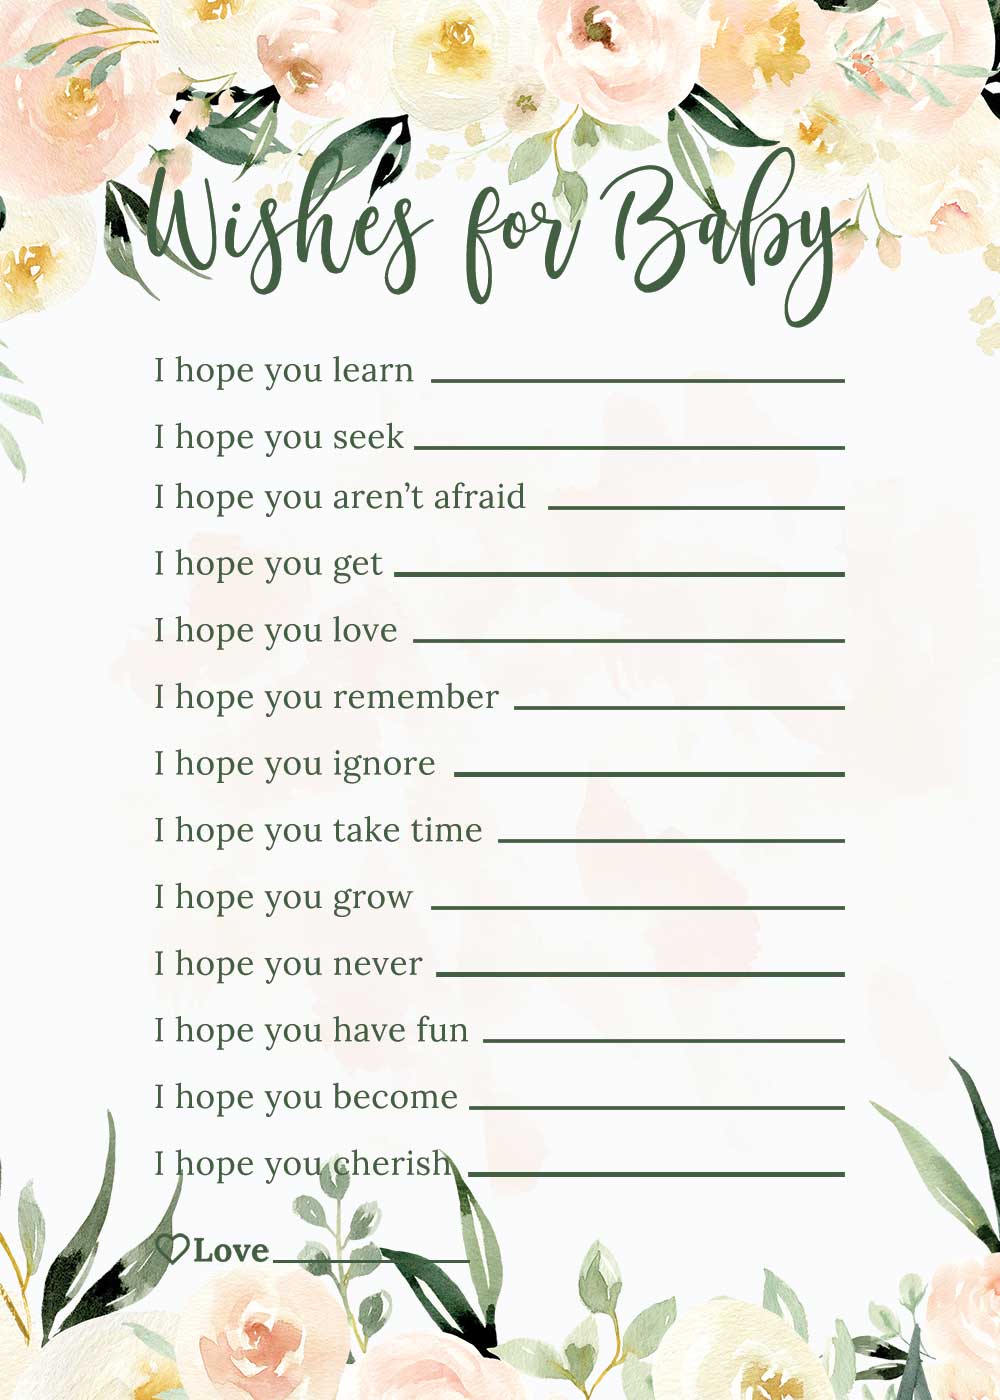 Baby Shower Wishes for baby card - Blush theme